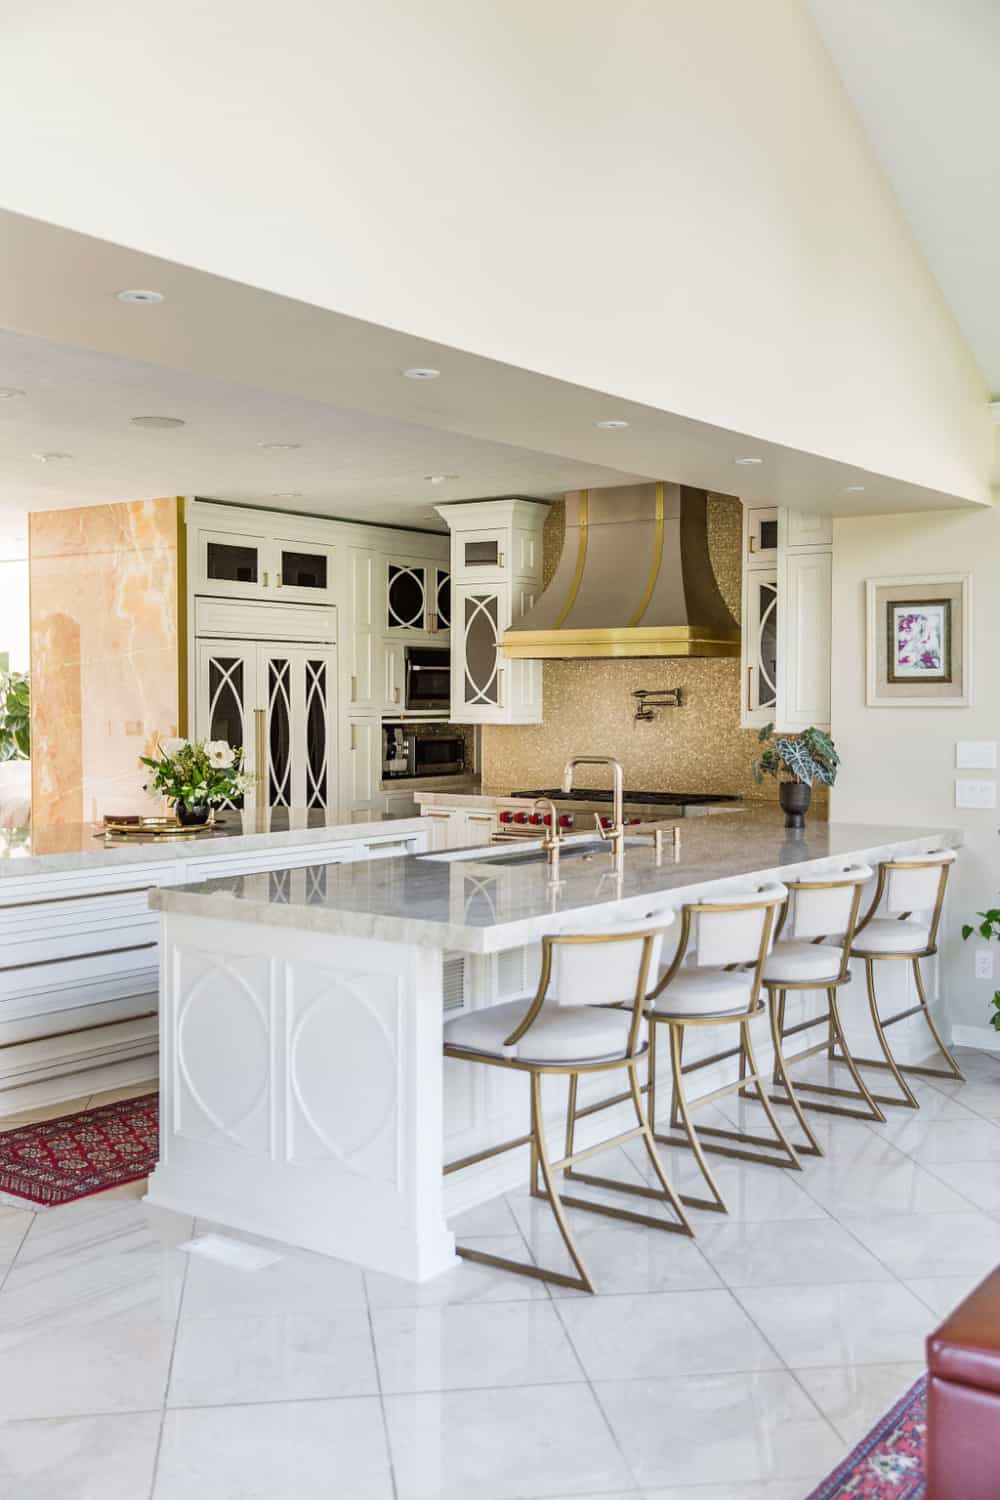 Nicholas Design Build |         A large kitchen with a center island and bar stools, perfect for a remodel.